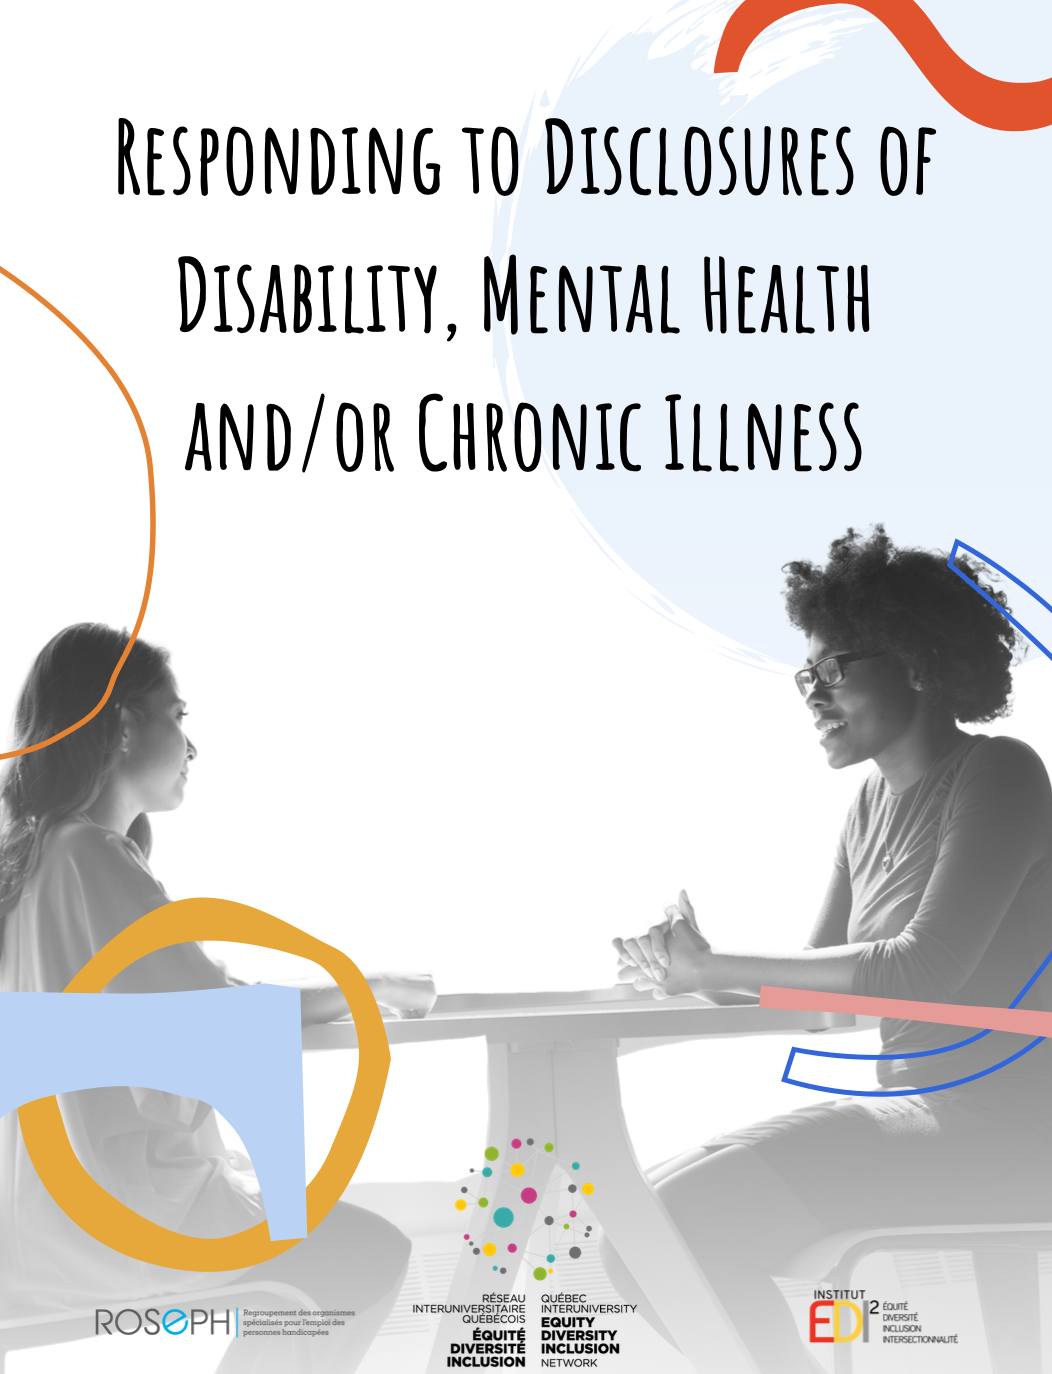 Responding to disclosure of disability, mental health and/or chronic illness, by McGill, RIQEDI, Institut EDI2 and ROSEPH